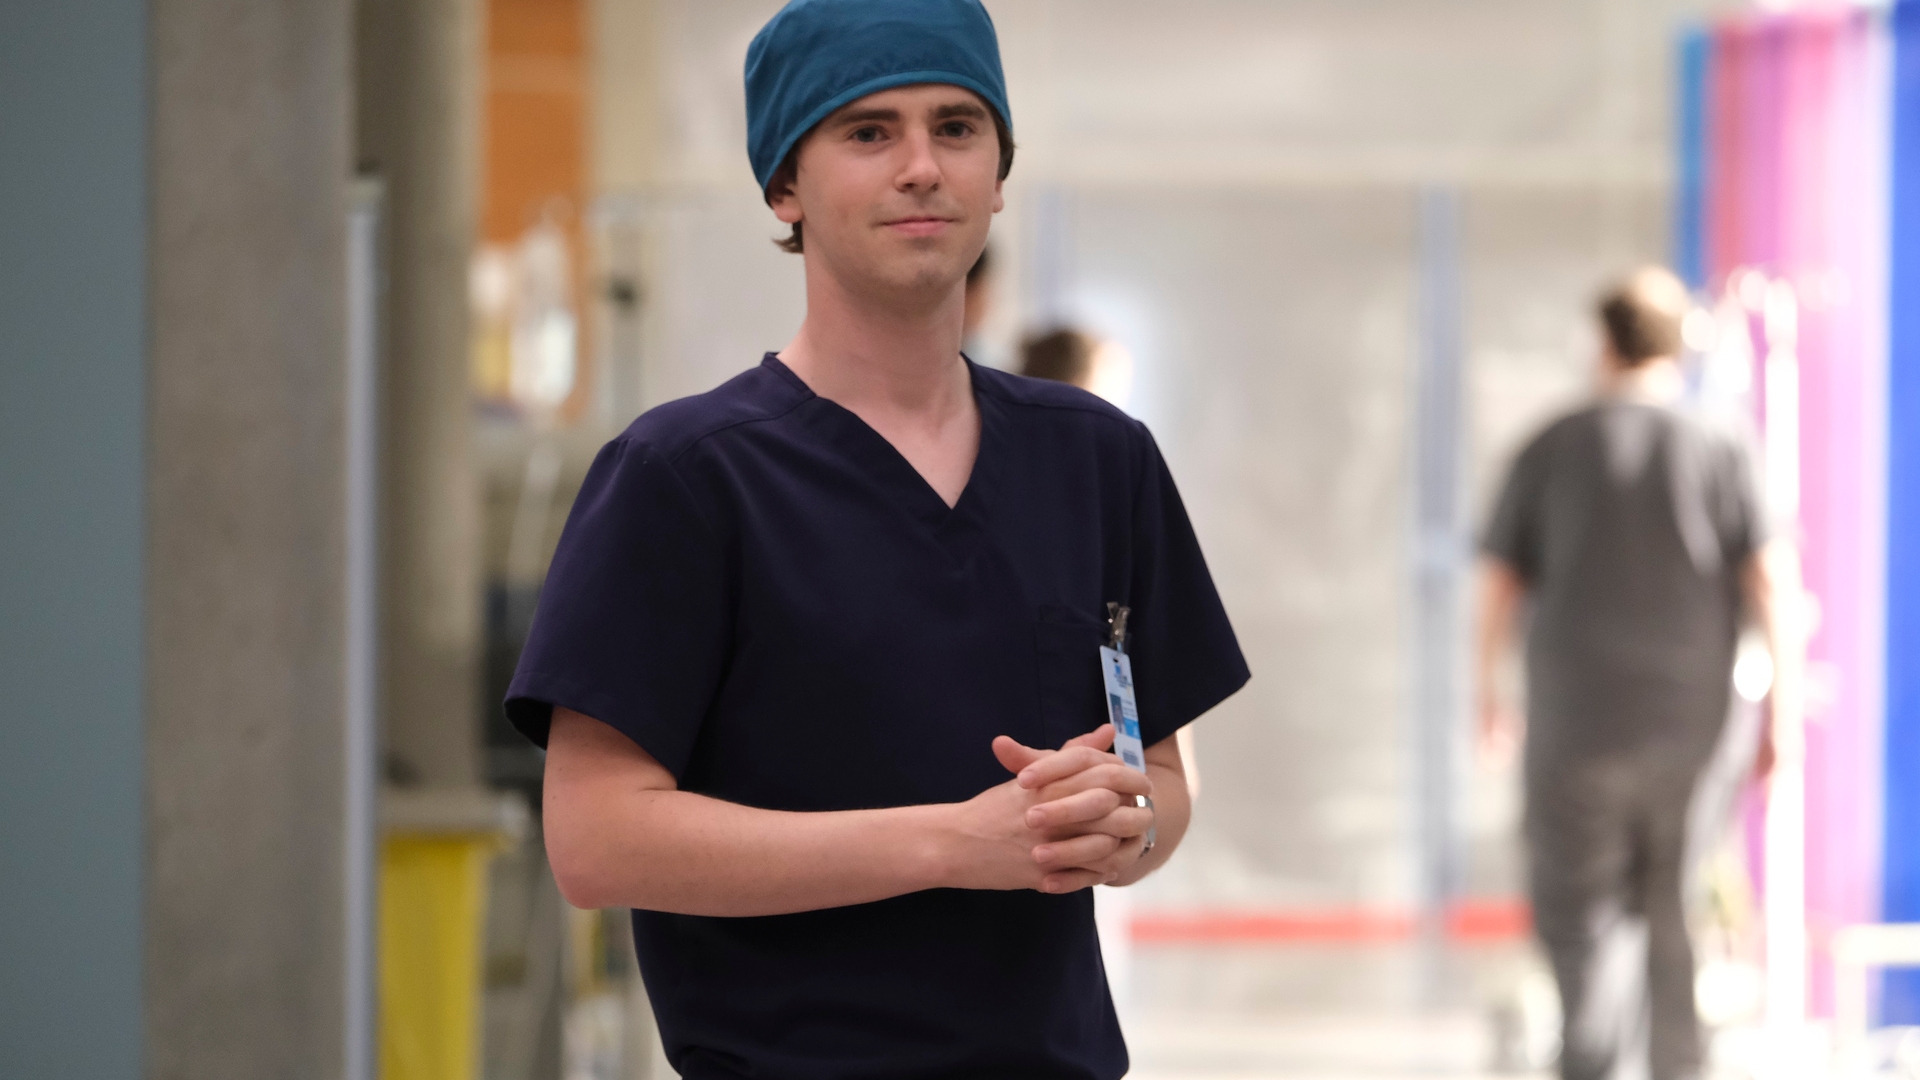 The Good Doctor S04